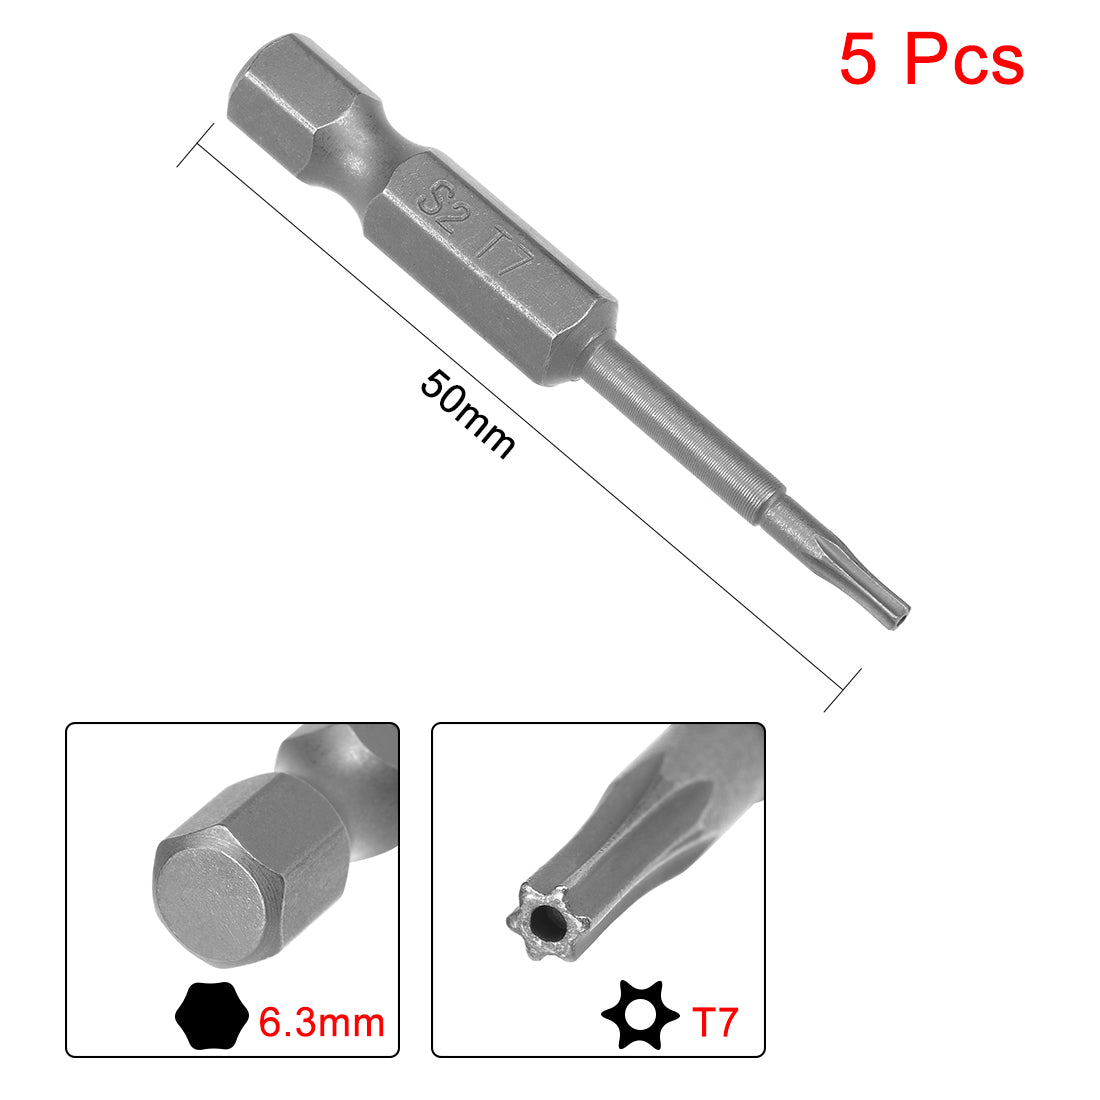 uxcell Uxcell Magnetic Torx Screwdriver Bits, Hex Shank S2 Security Tamper Proof Screw Driver Kit Tool